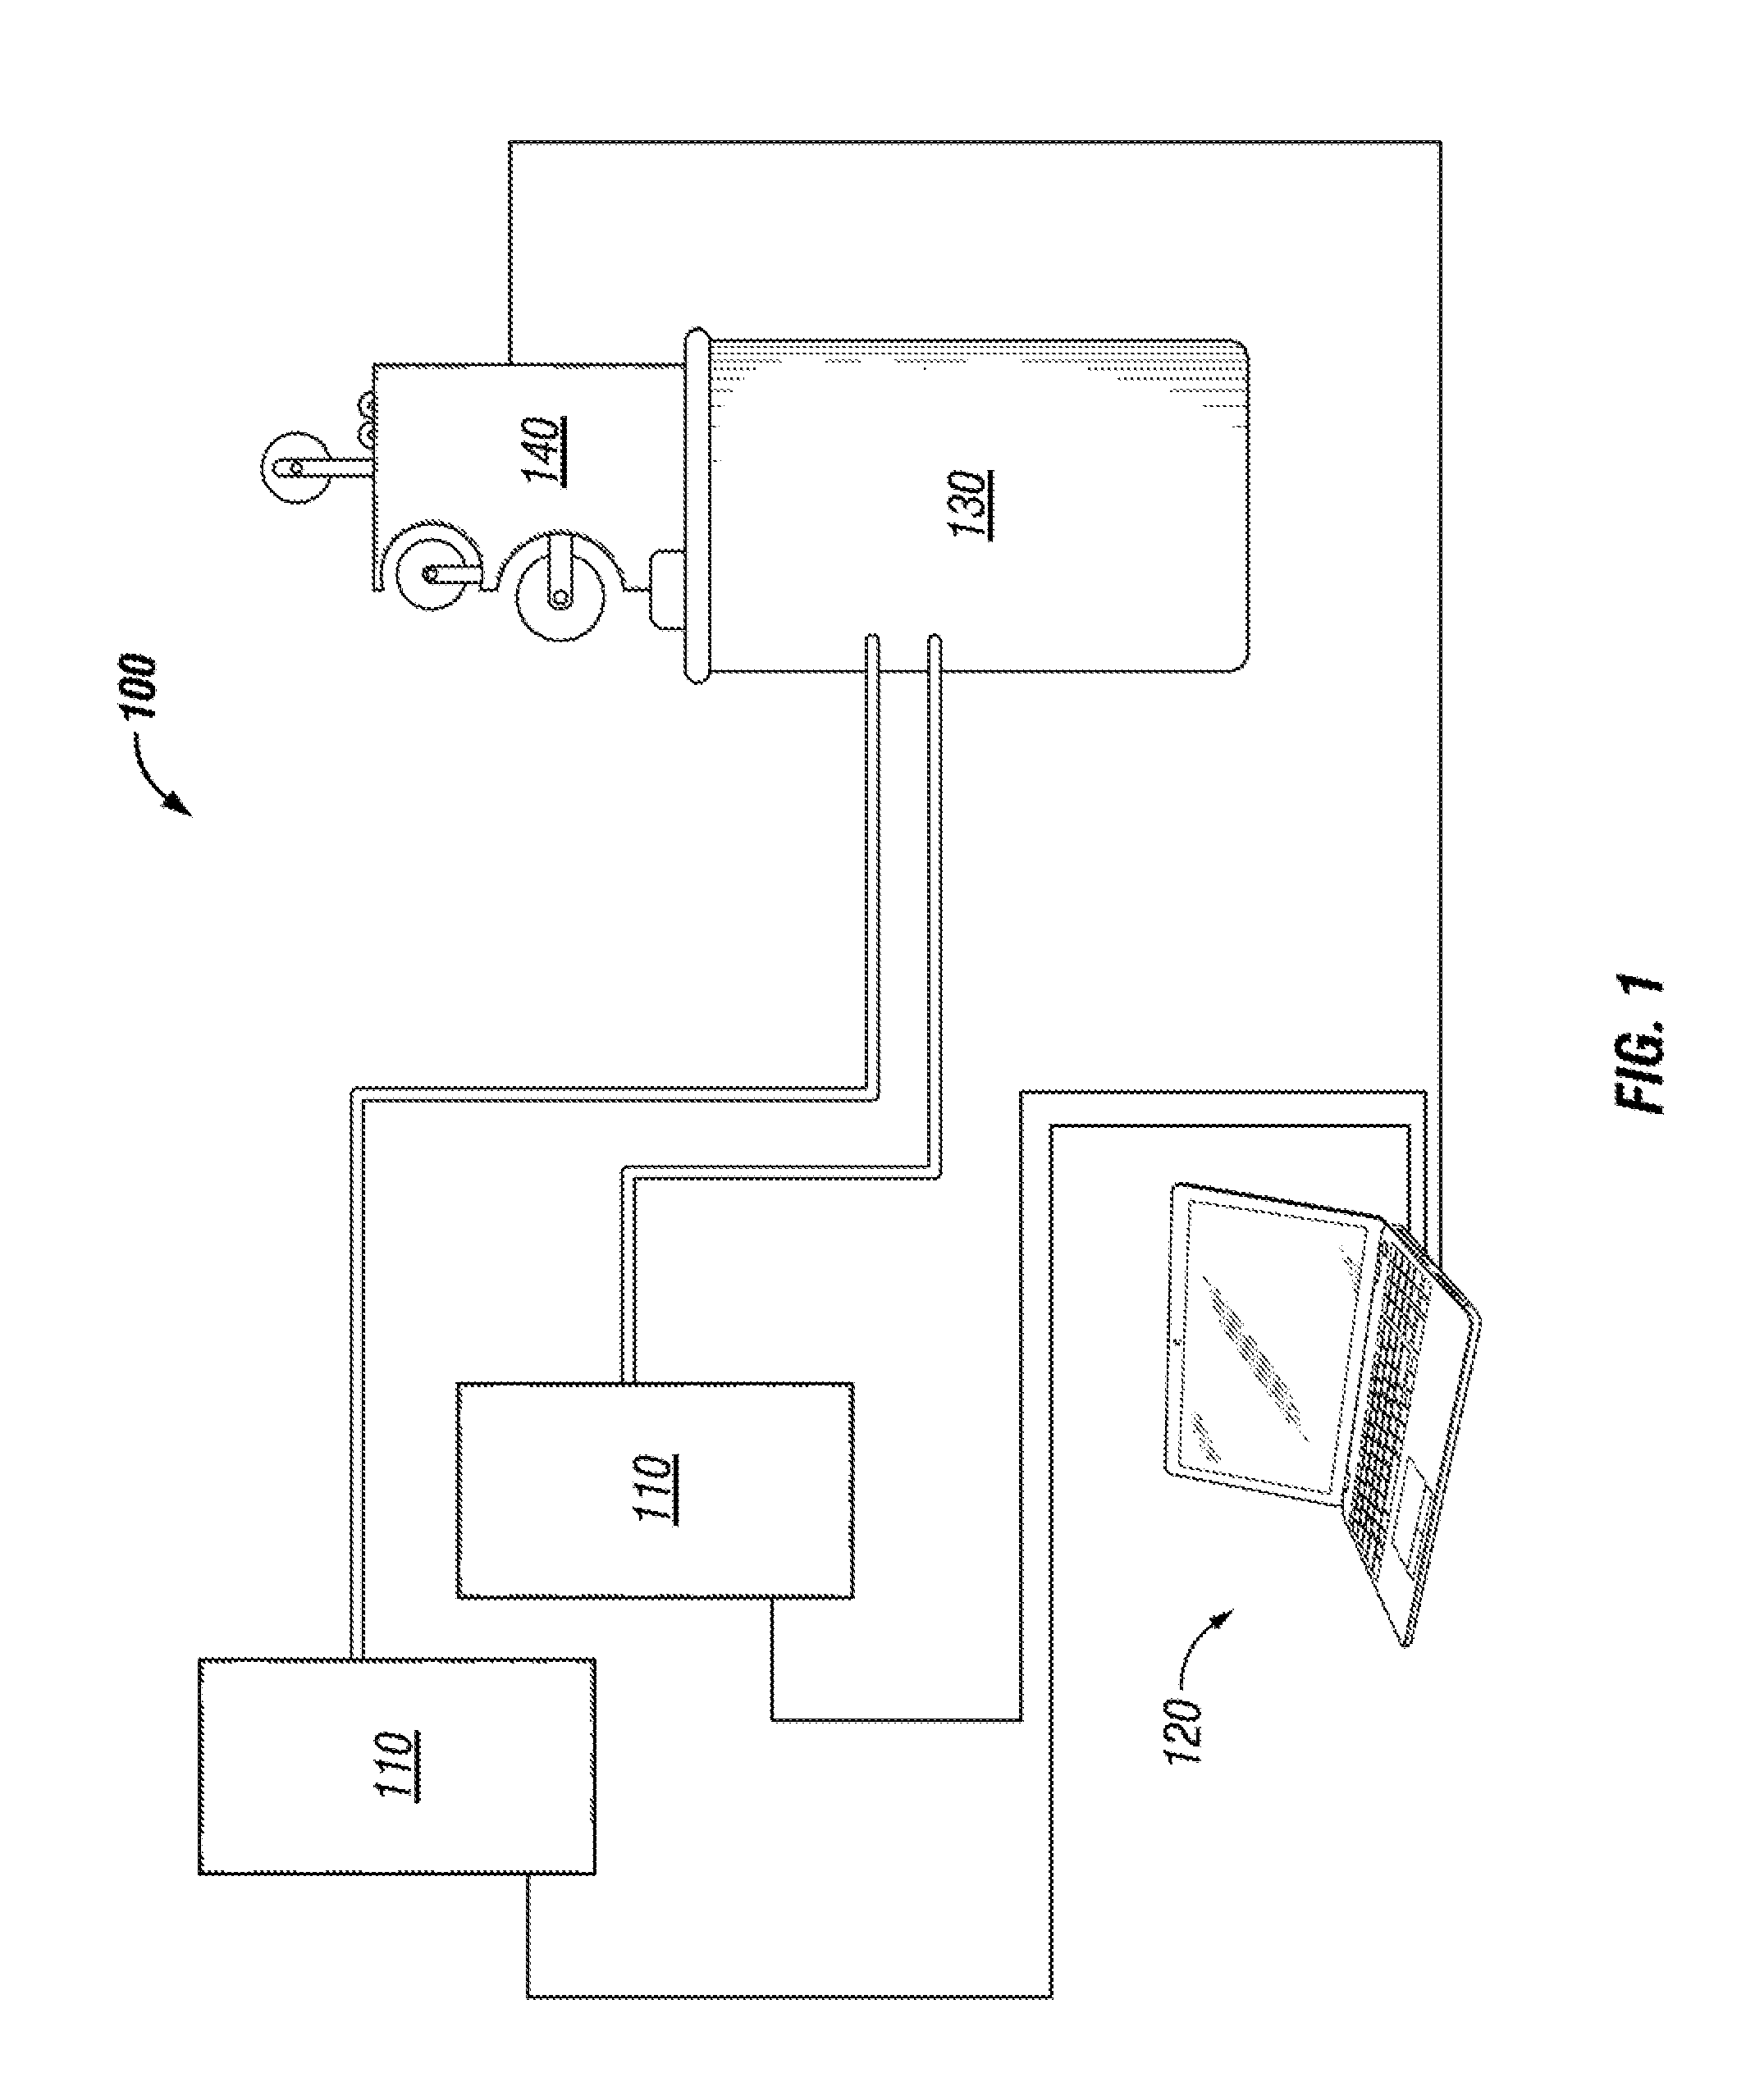 Systems and Methods for Continuous Manufacture of Buckypaper Materials